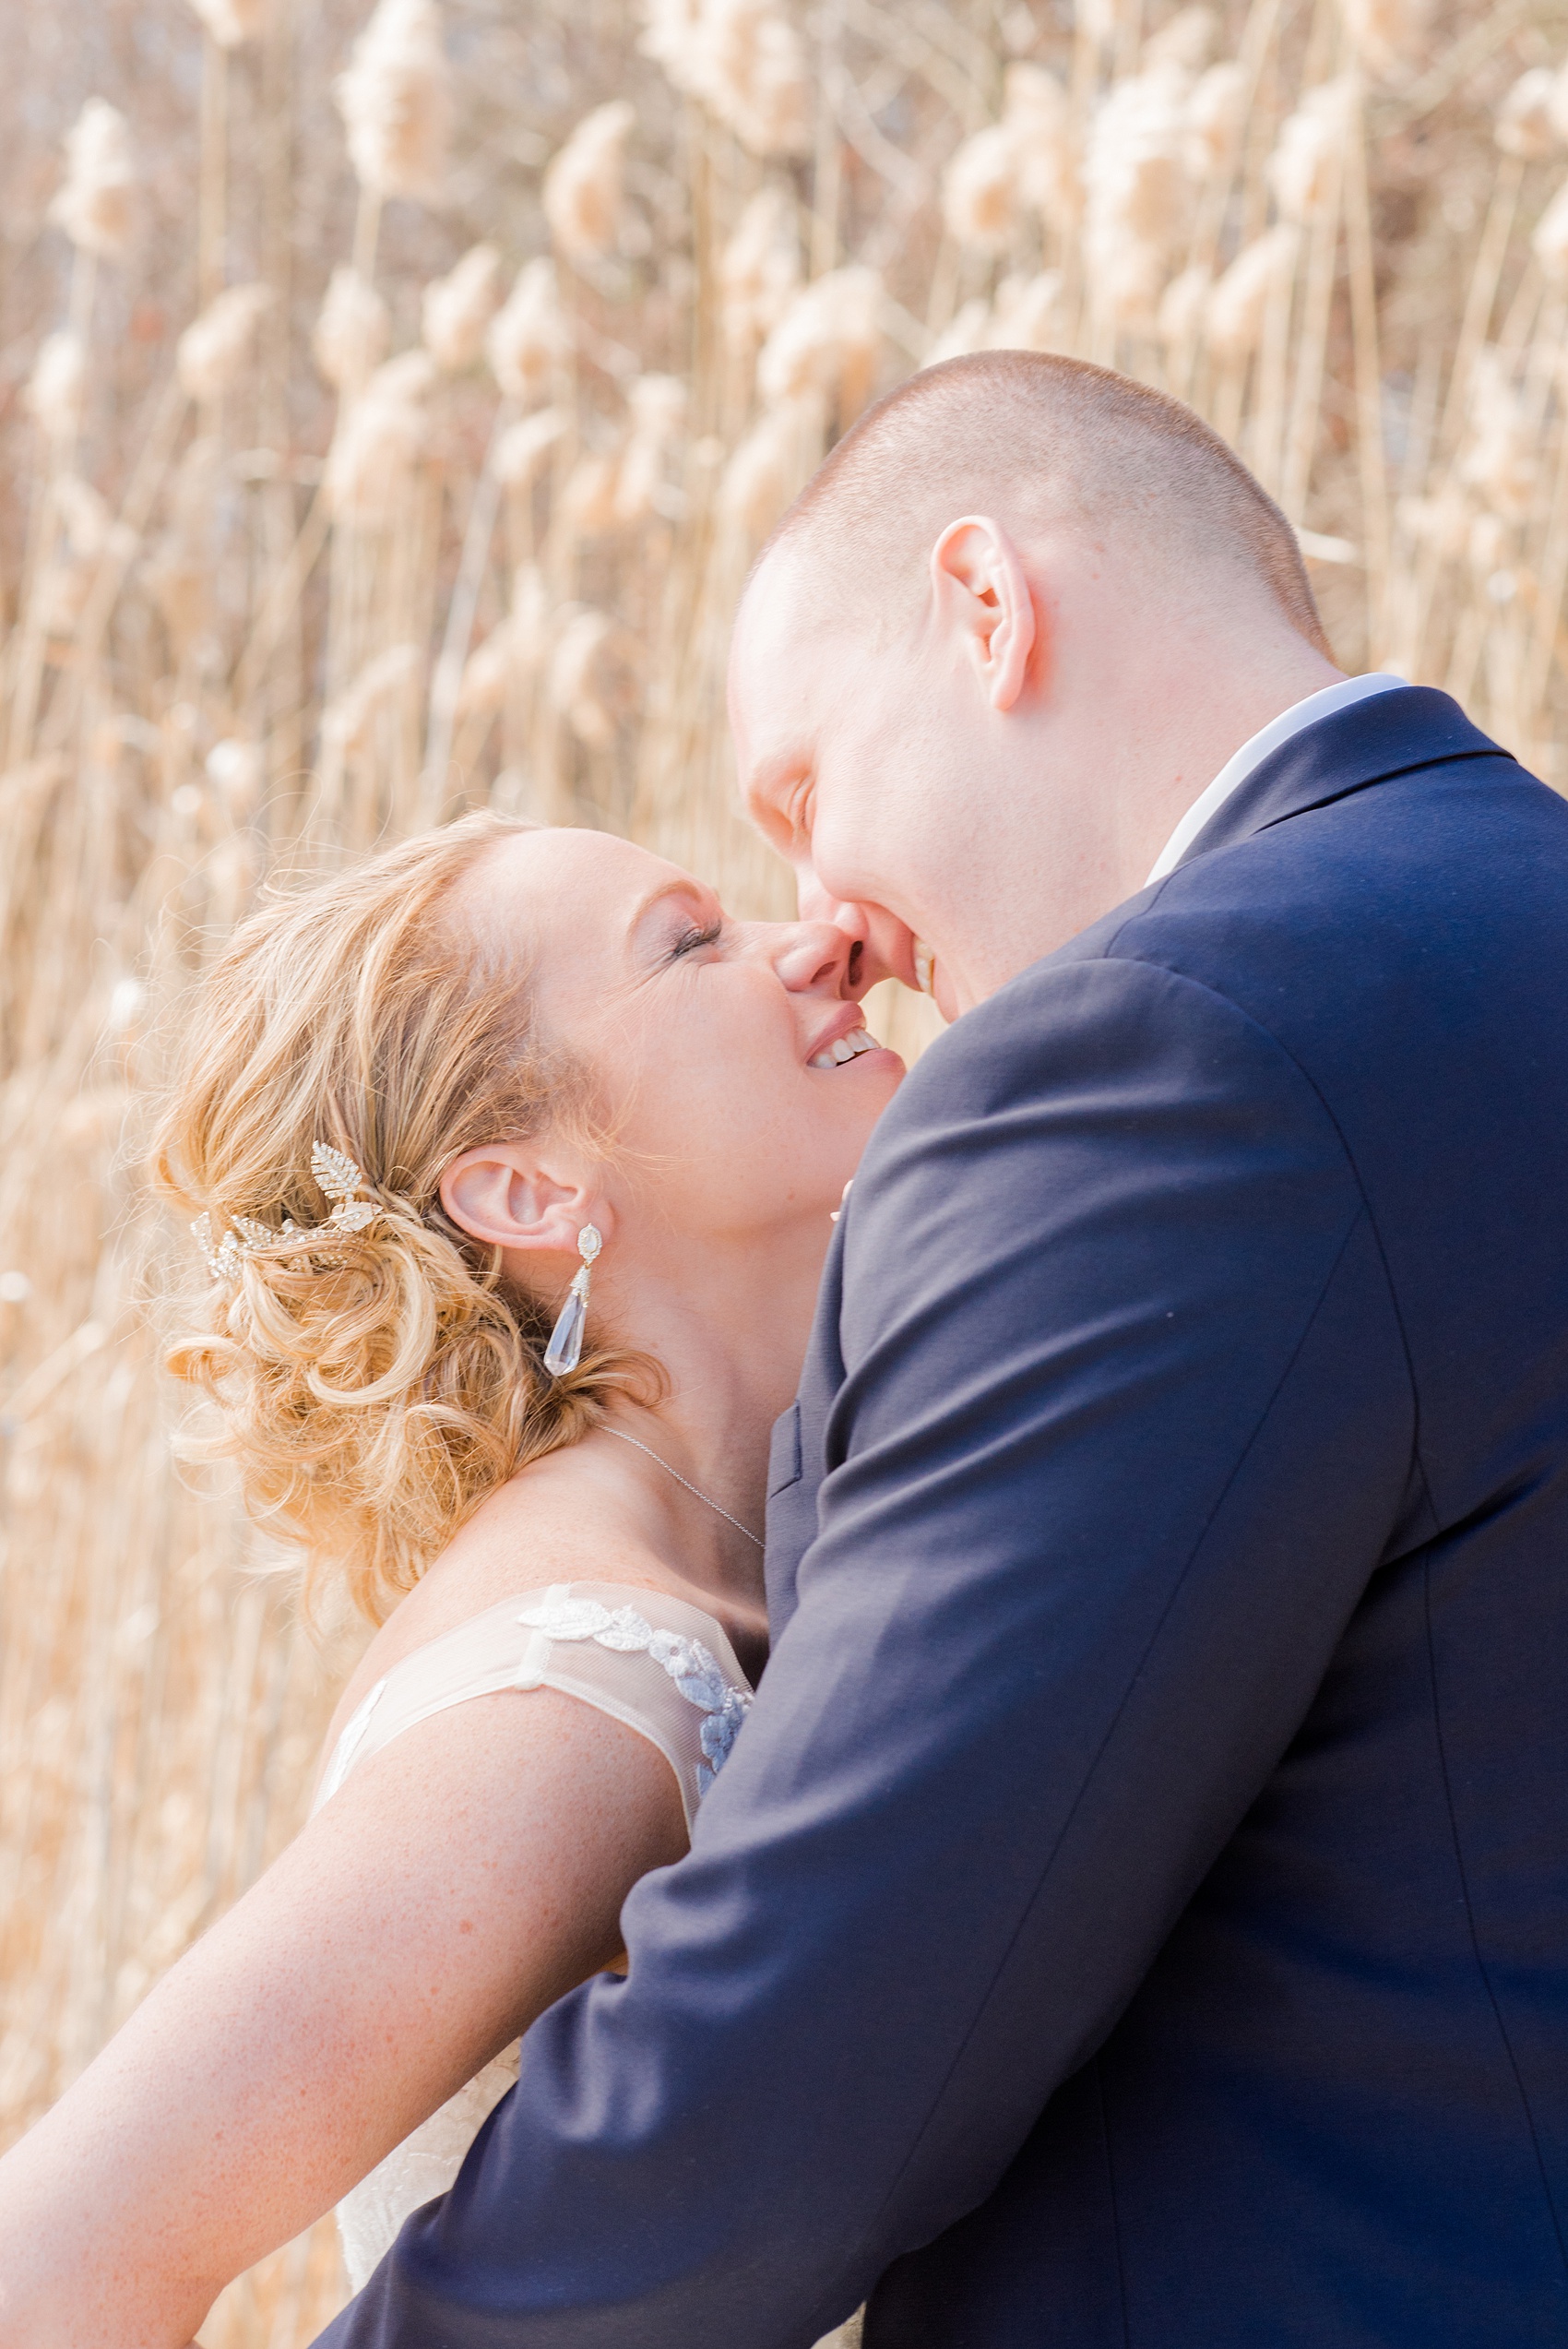 Saratoga Springs destination wedding photos by Mikkel Paige Photography. The bride and groom share a moment on the venue's property at Saratoga National Golf Club among the tall grasses for their spring, April wedding. #SaratogaSpringsNY #SaratogaSprings #mikkelpaige #NYwedding #destinationwedding 